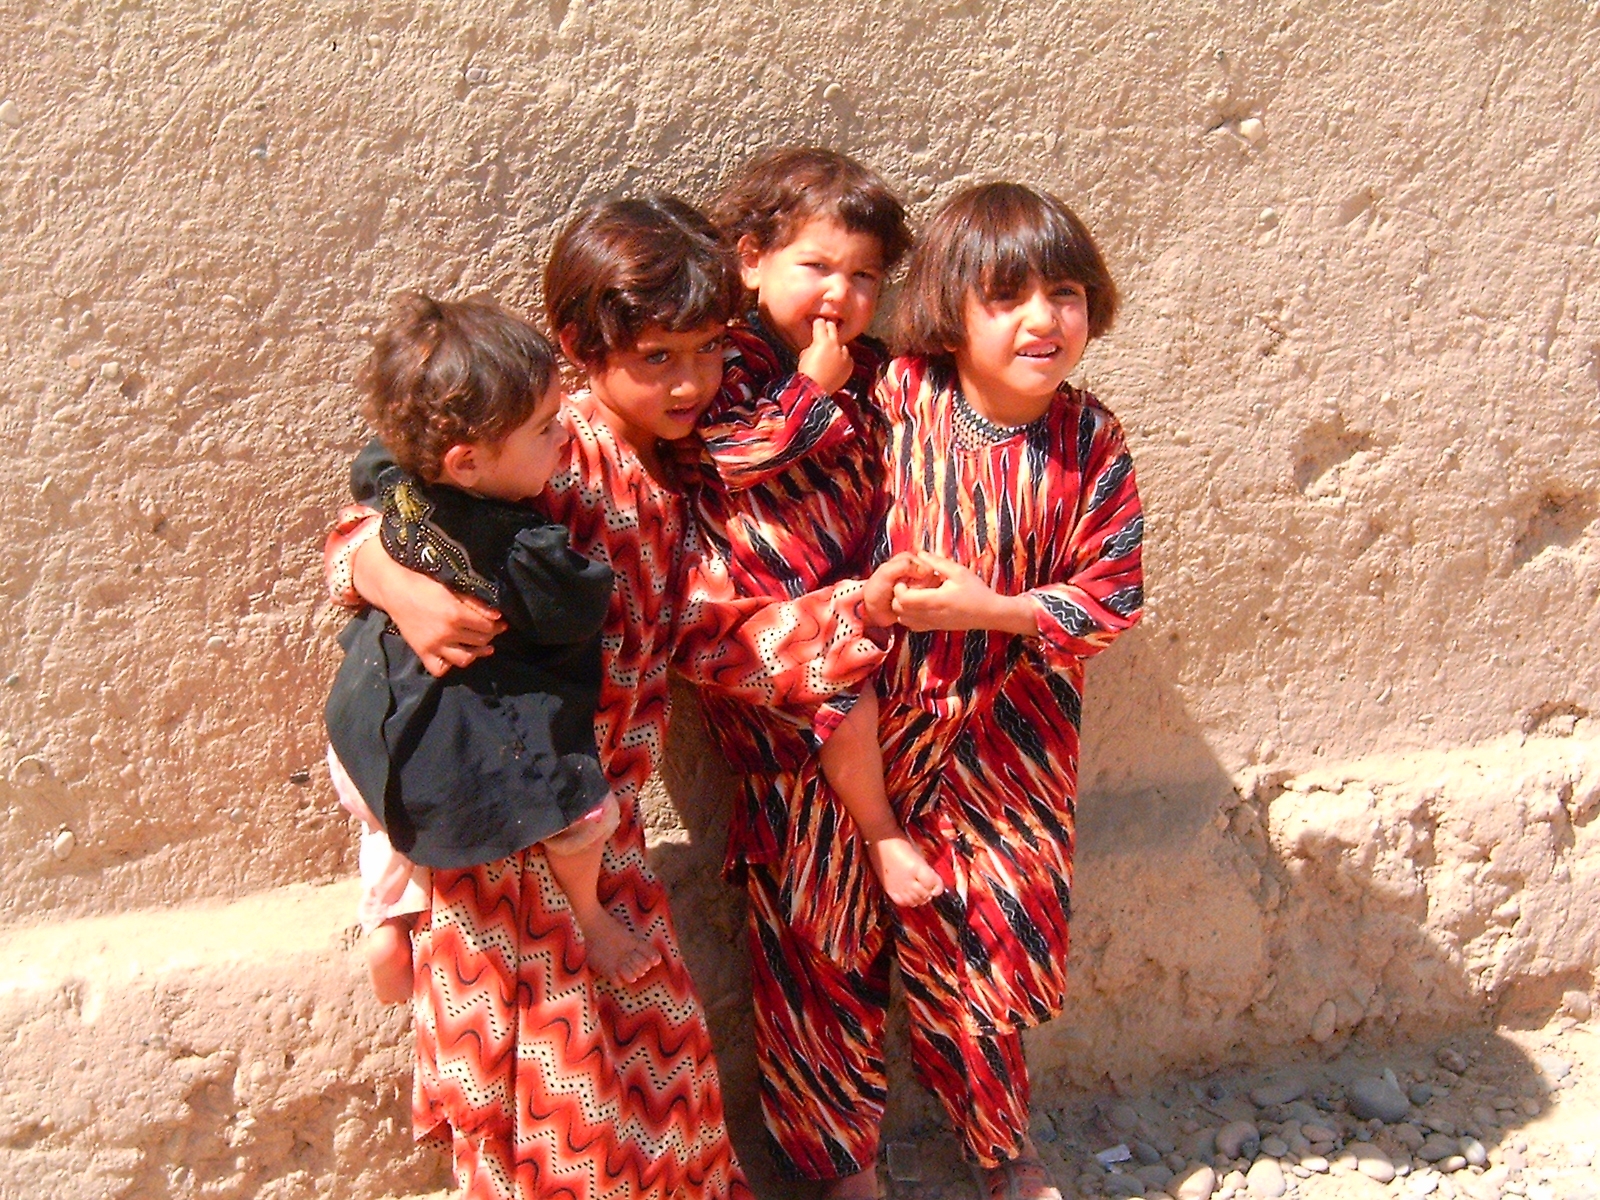 Afghanistan Girls Images